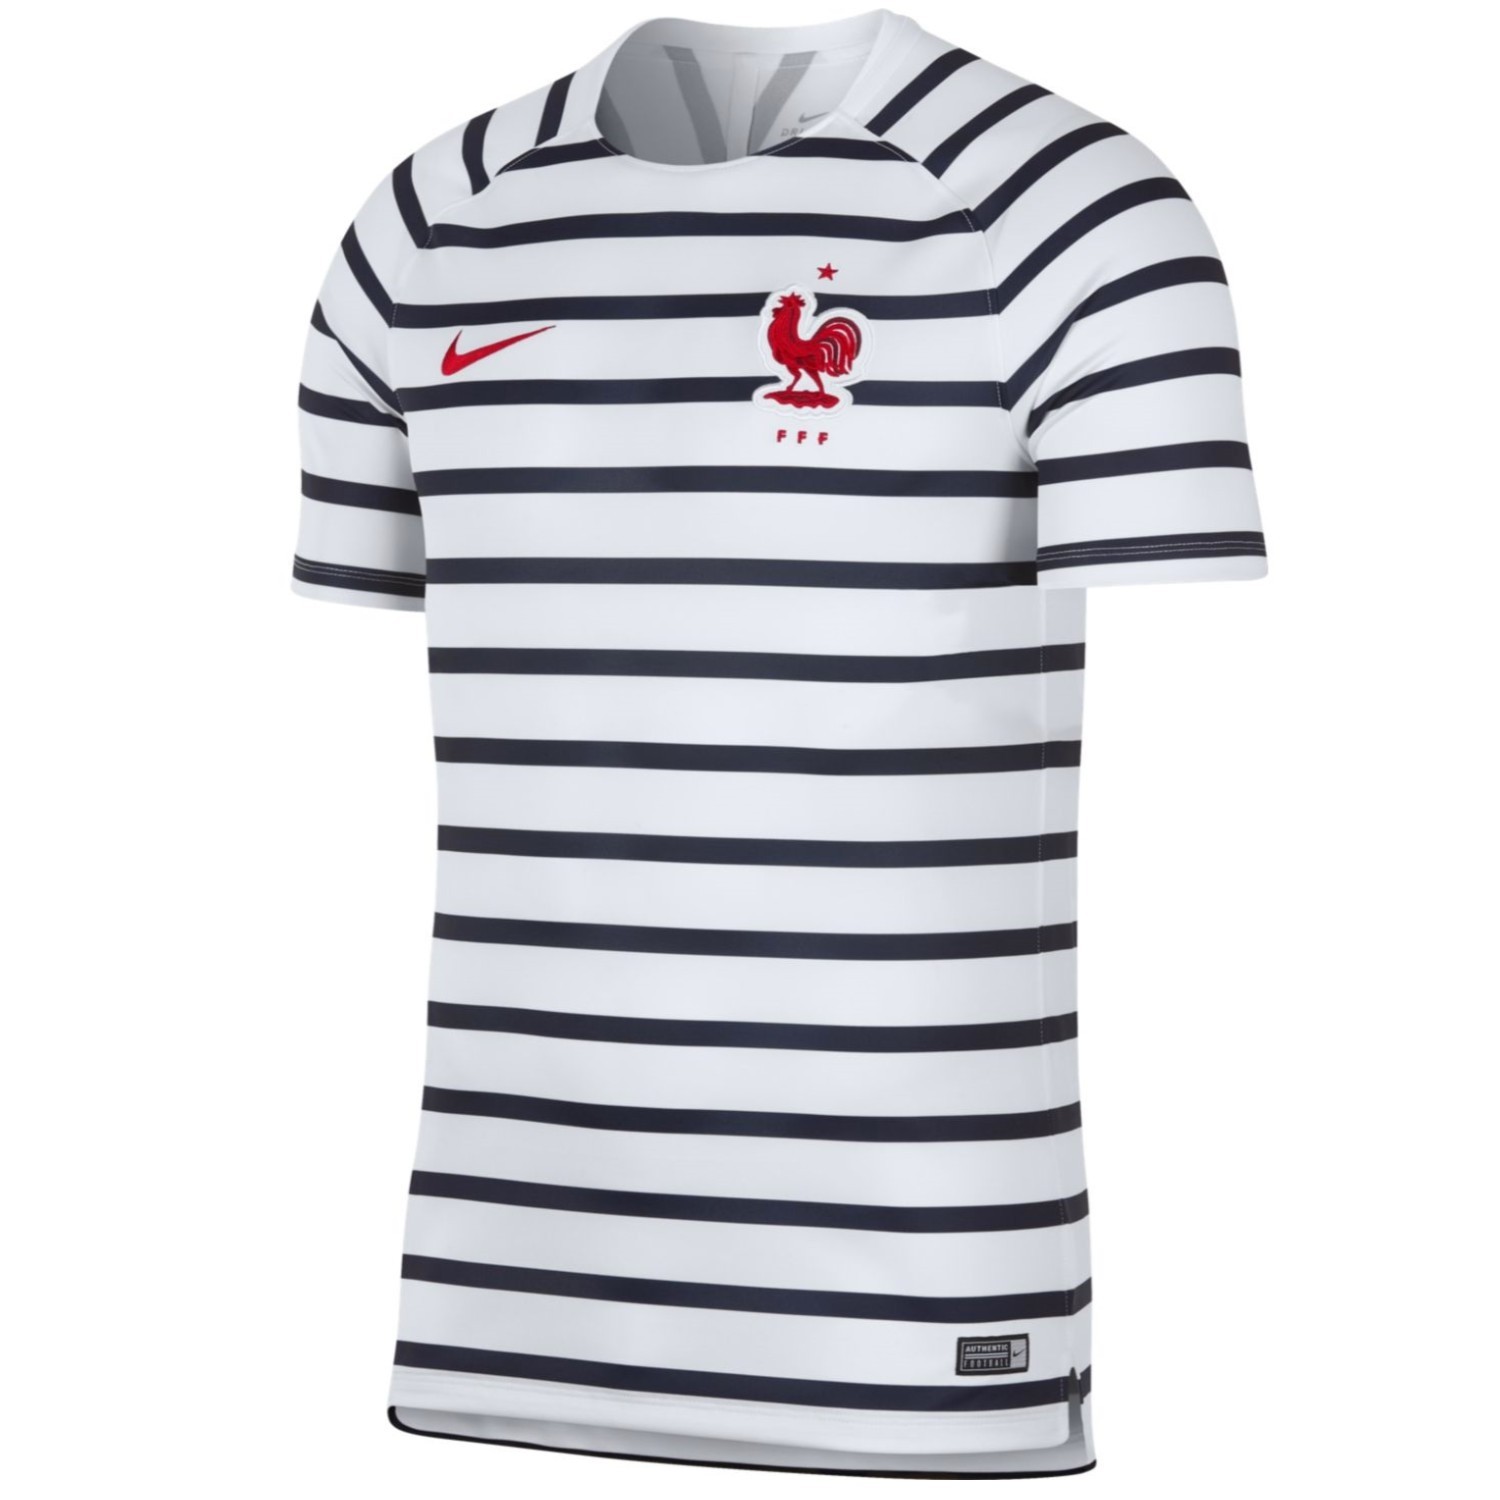 france warm up jersey